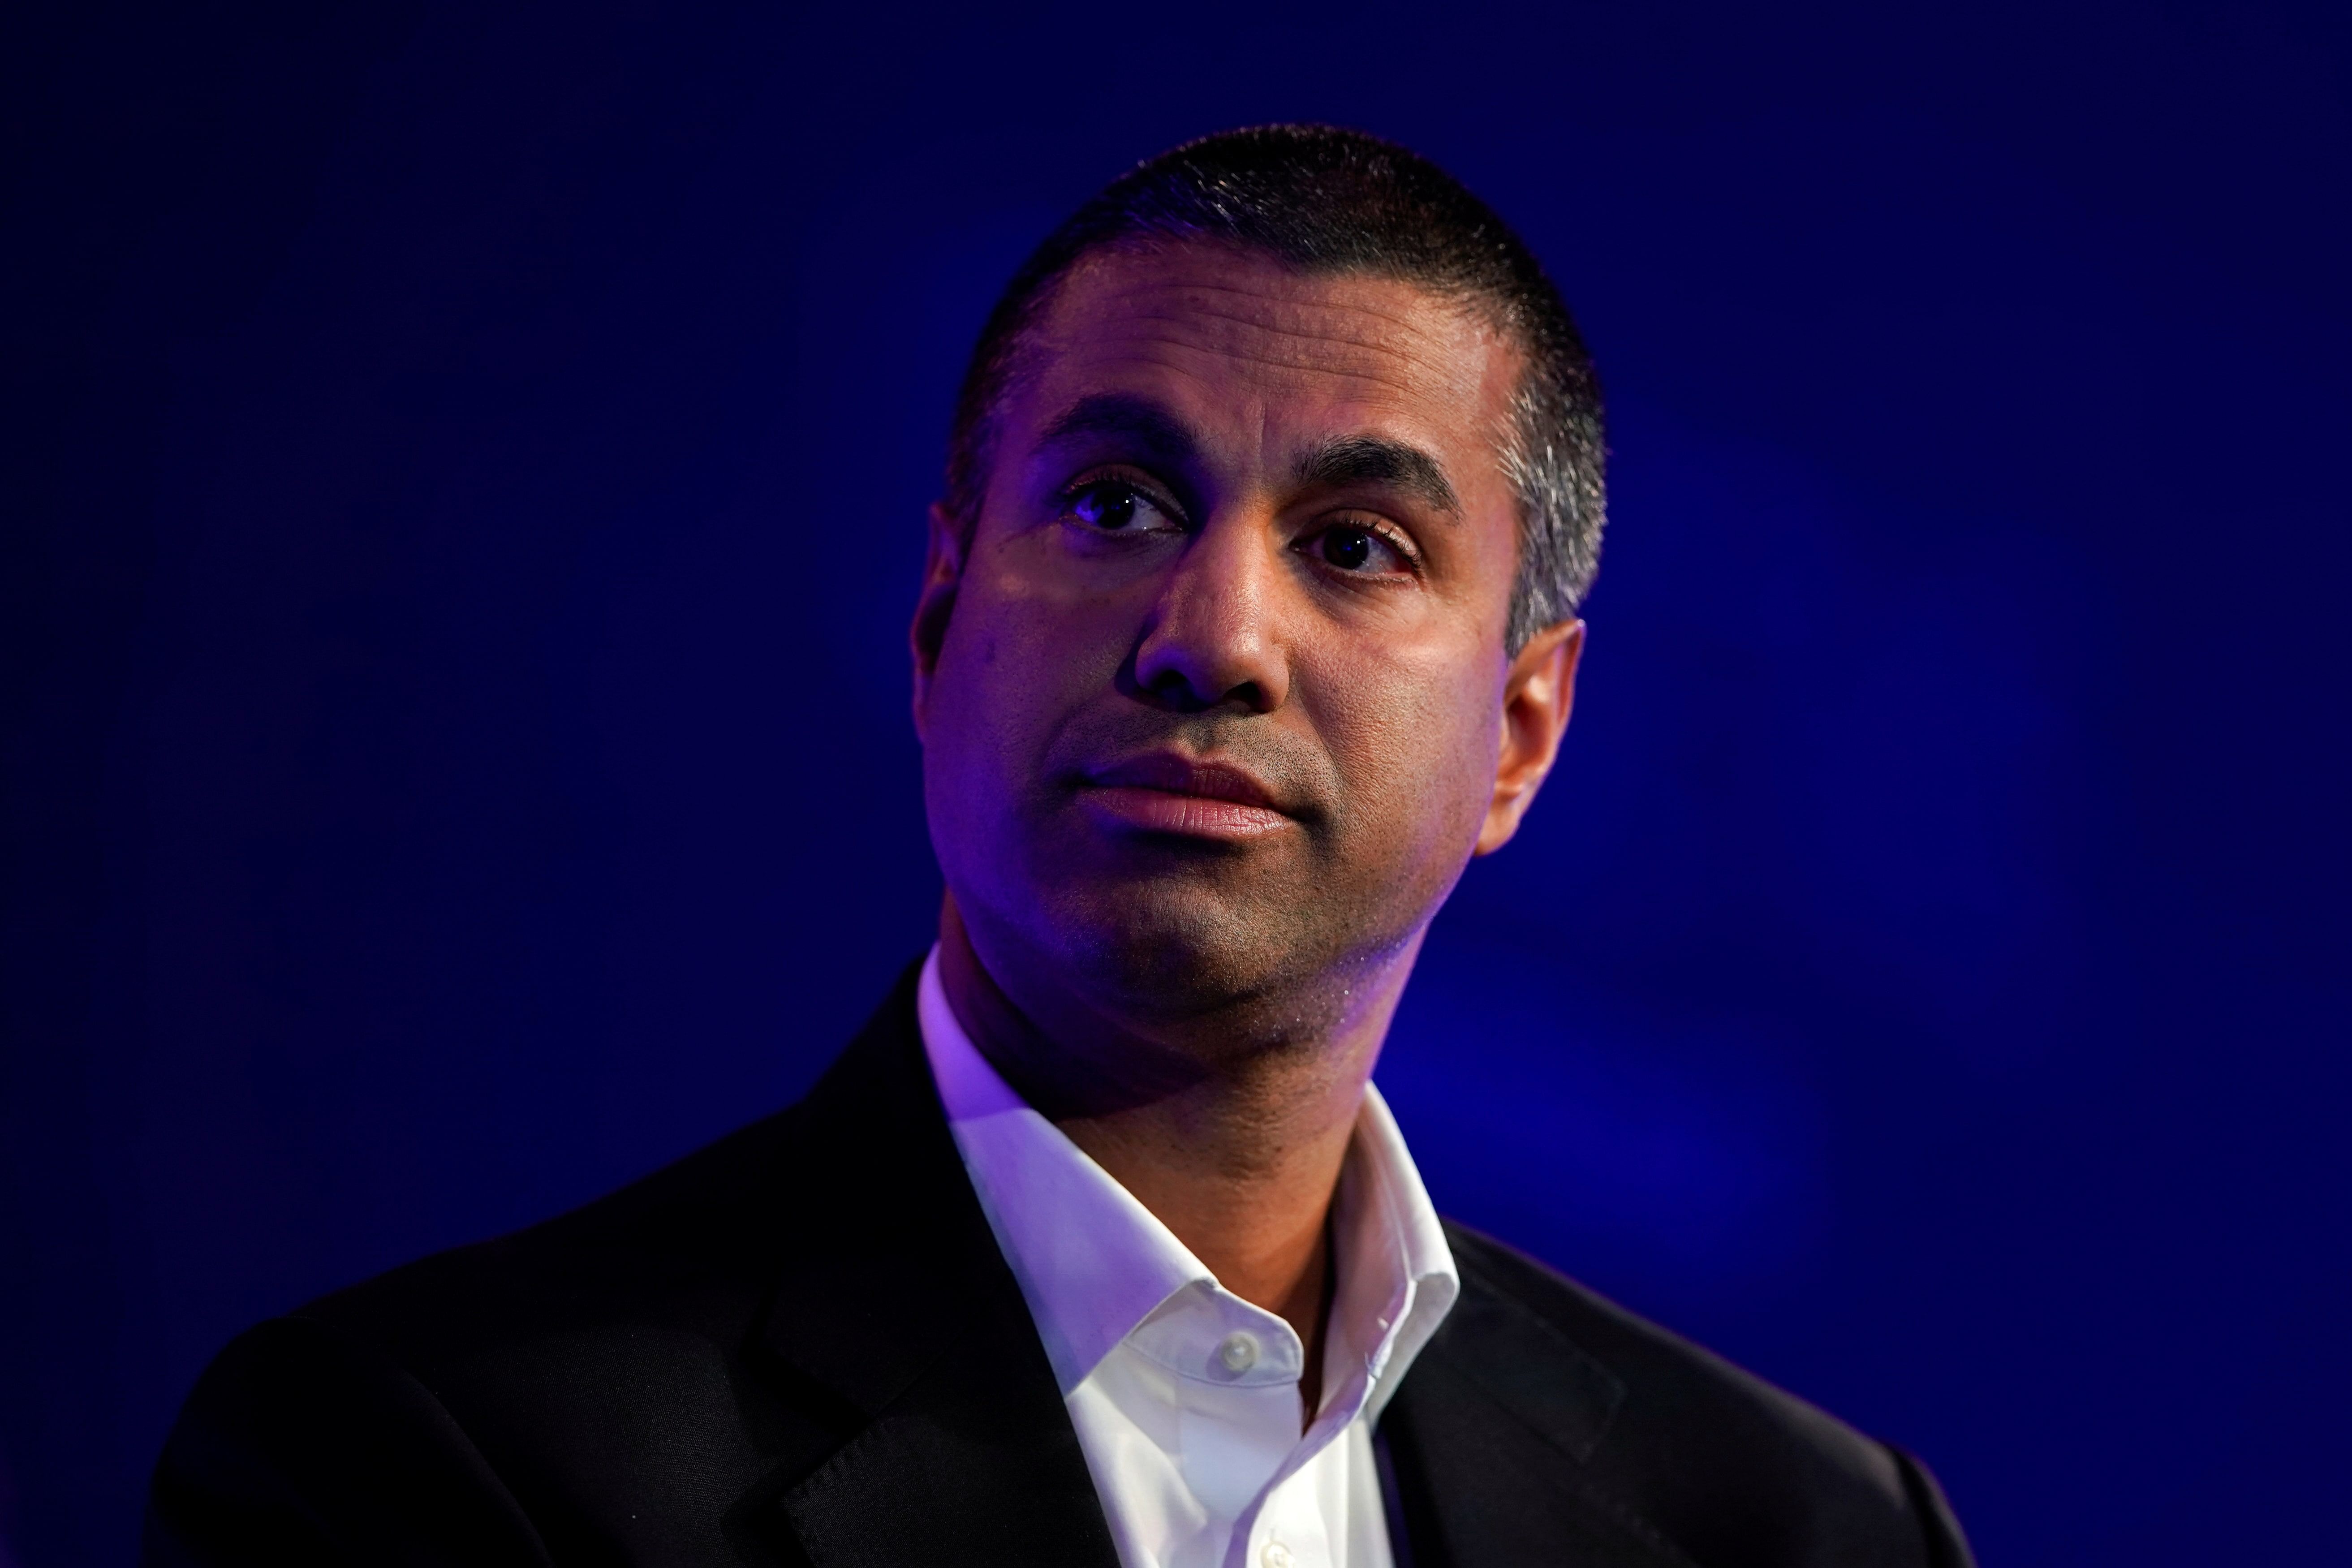 Pai said during his India trip, they we will be discussing issues of mutual interest like 5G and bridging the digital divide. (Credit: Reuters Photo)